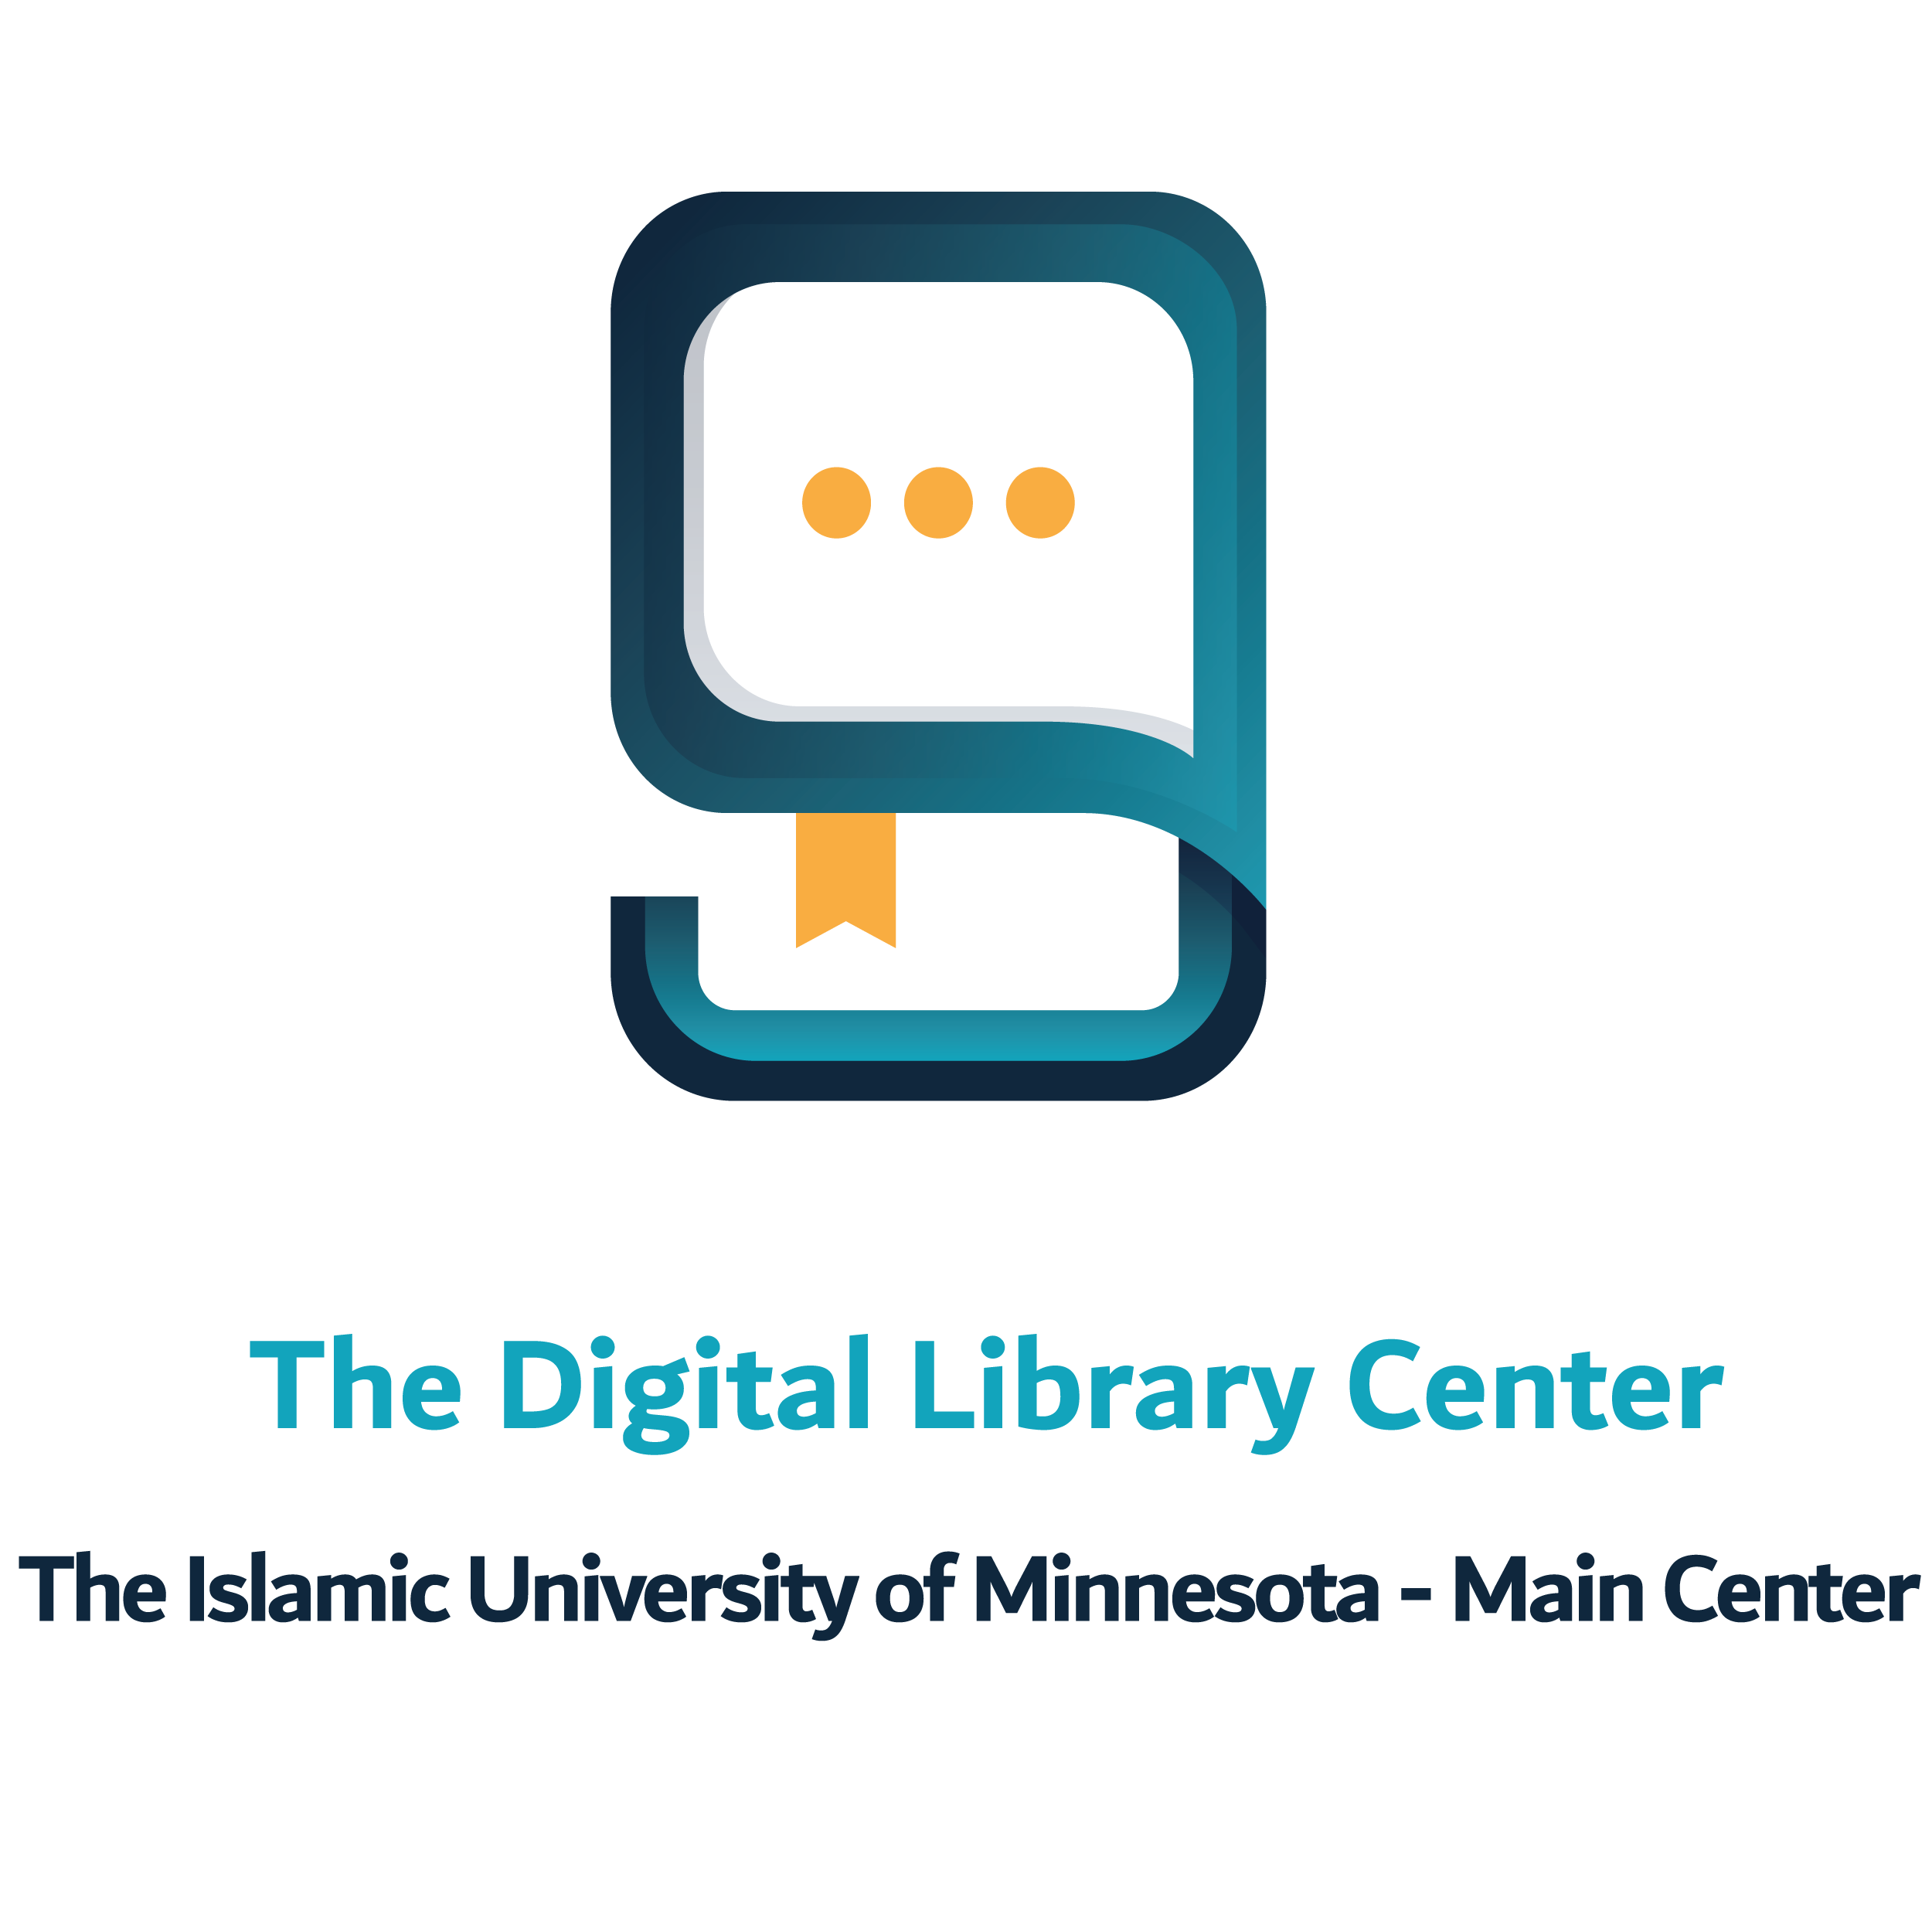 The Digital Library